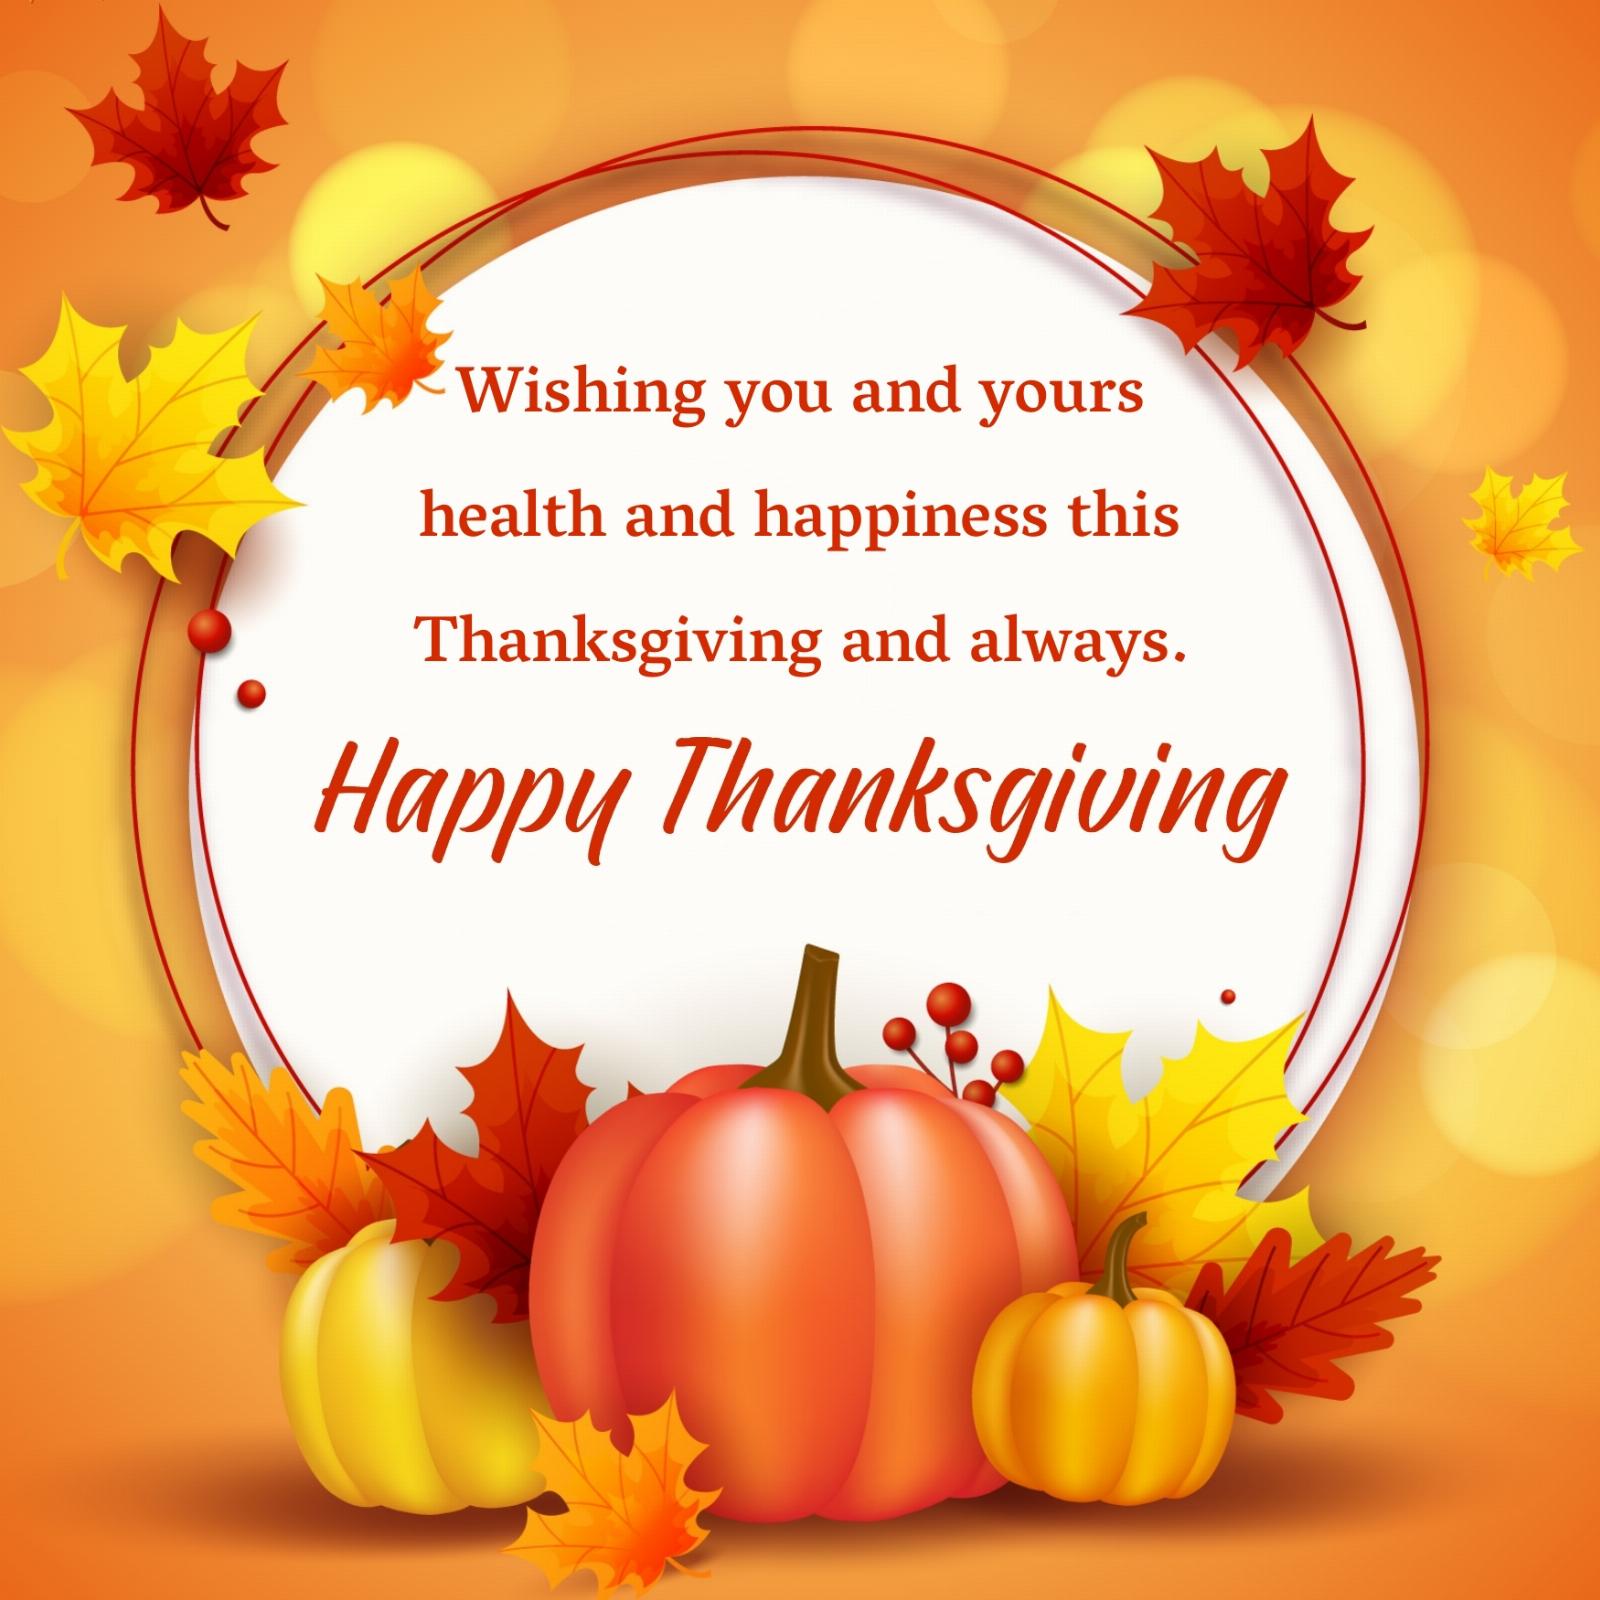 Wishing you and yours health and happiness this Thanksgiving and always